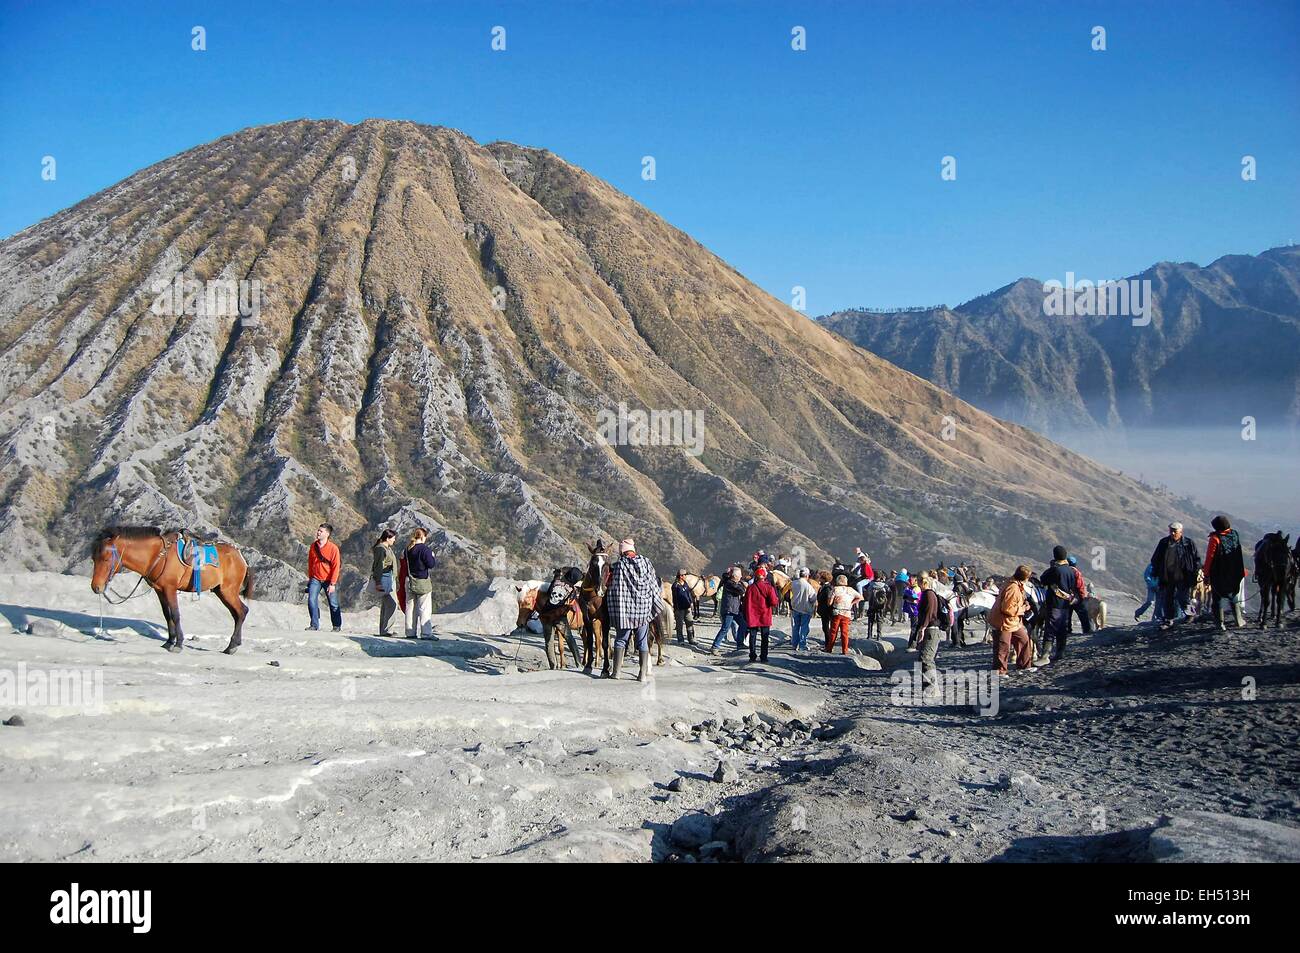 Indonesia, Java, Jawa Timur, Bromo-Tengger-Semeru National Park, tourists, locals and horses at the foot of mount Bromo, mount Batok in the background Stock Photo